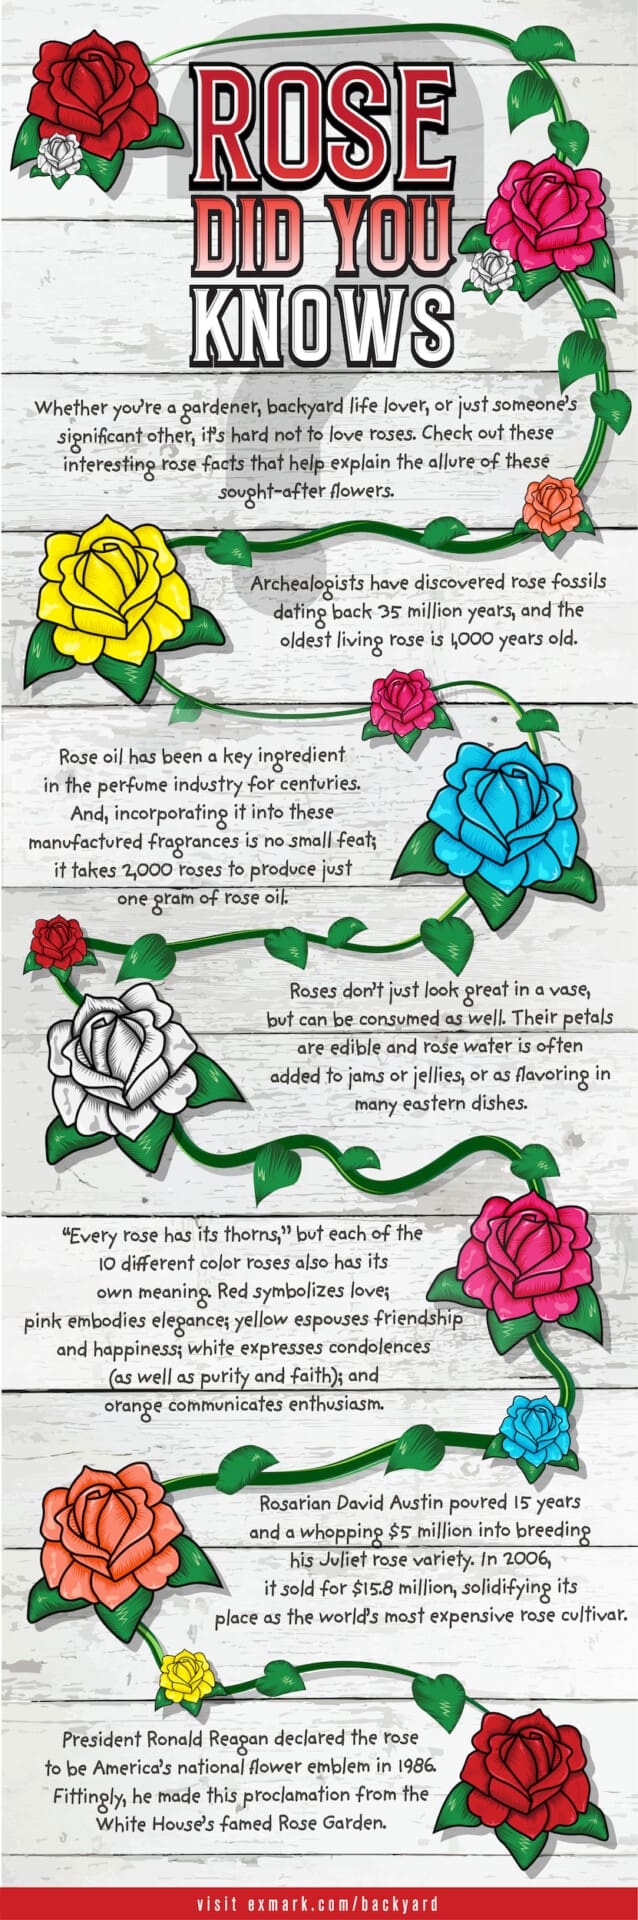 Infographic of rose facts